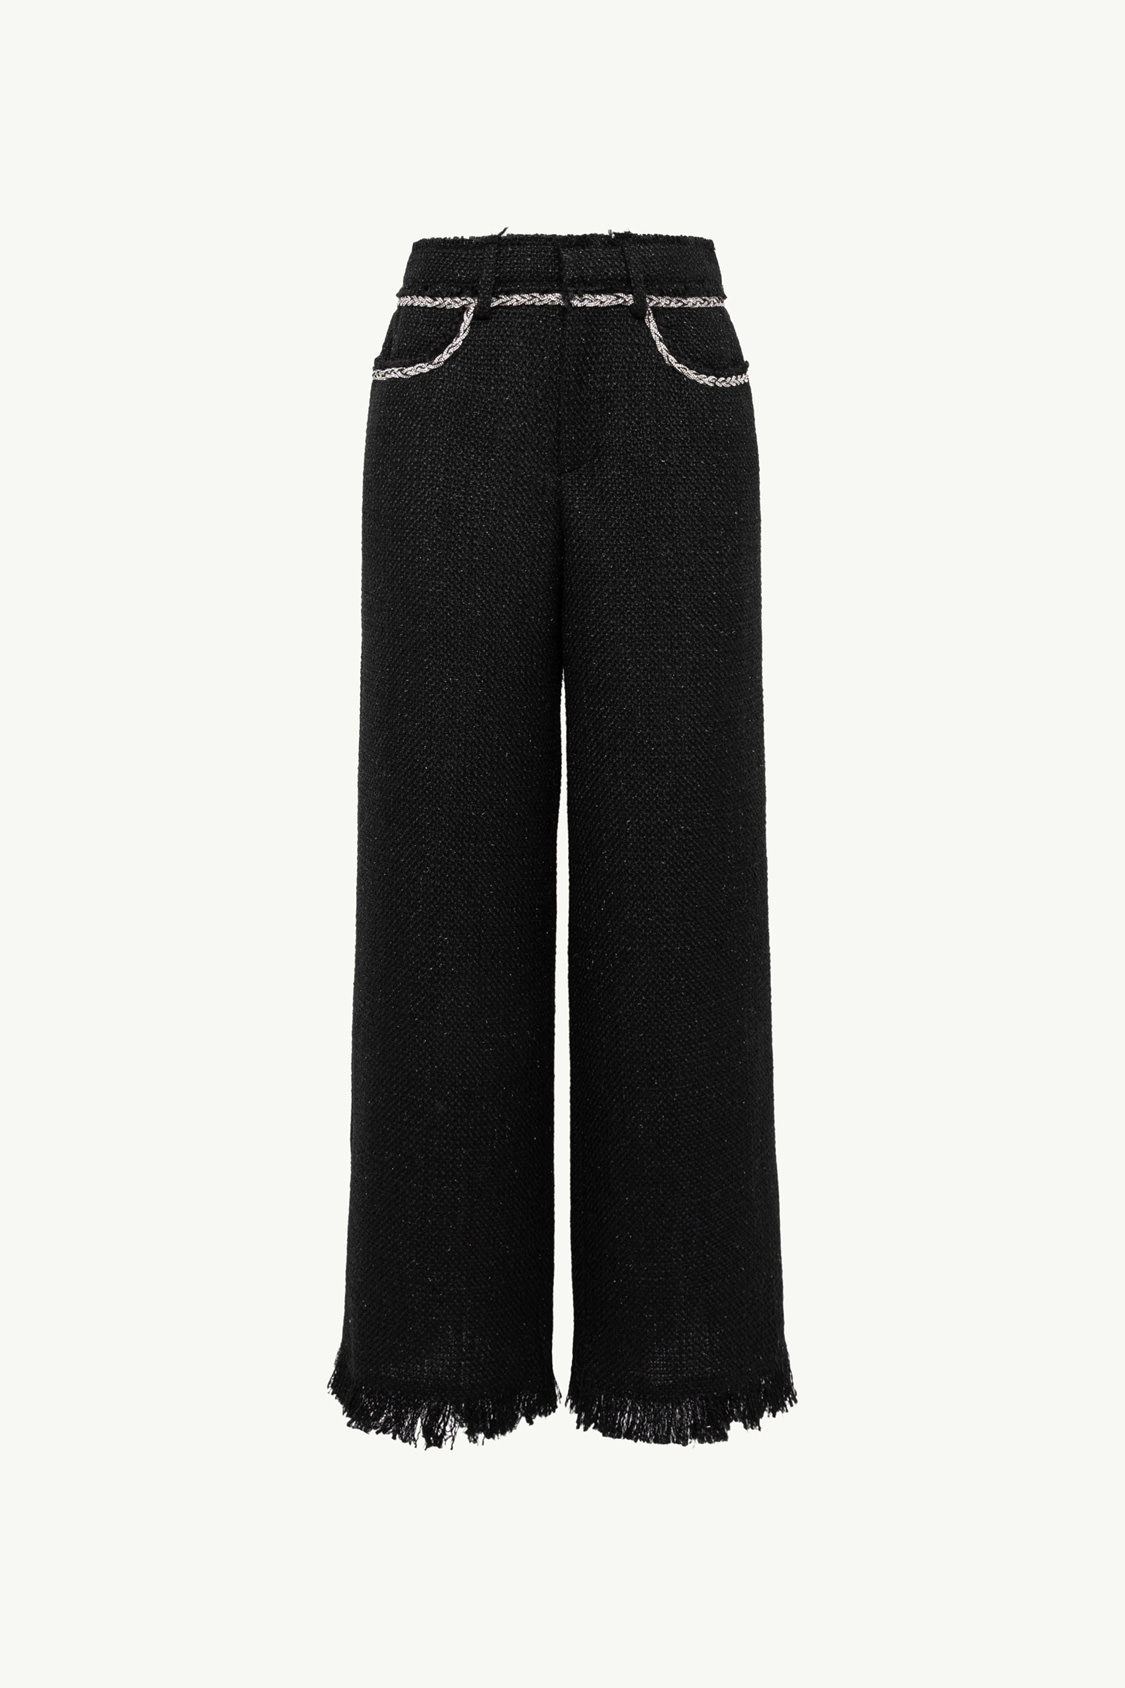 MADE IN ITALY PANTS IN BOUCLÉ FABRIC